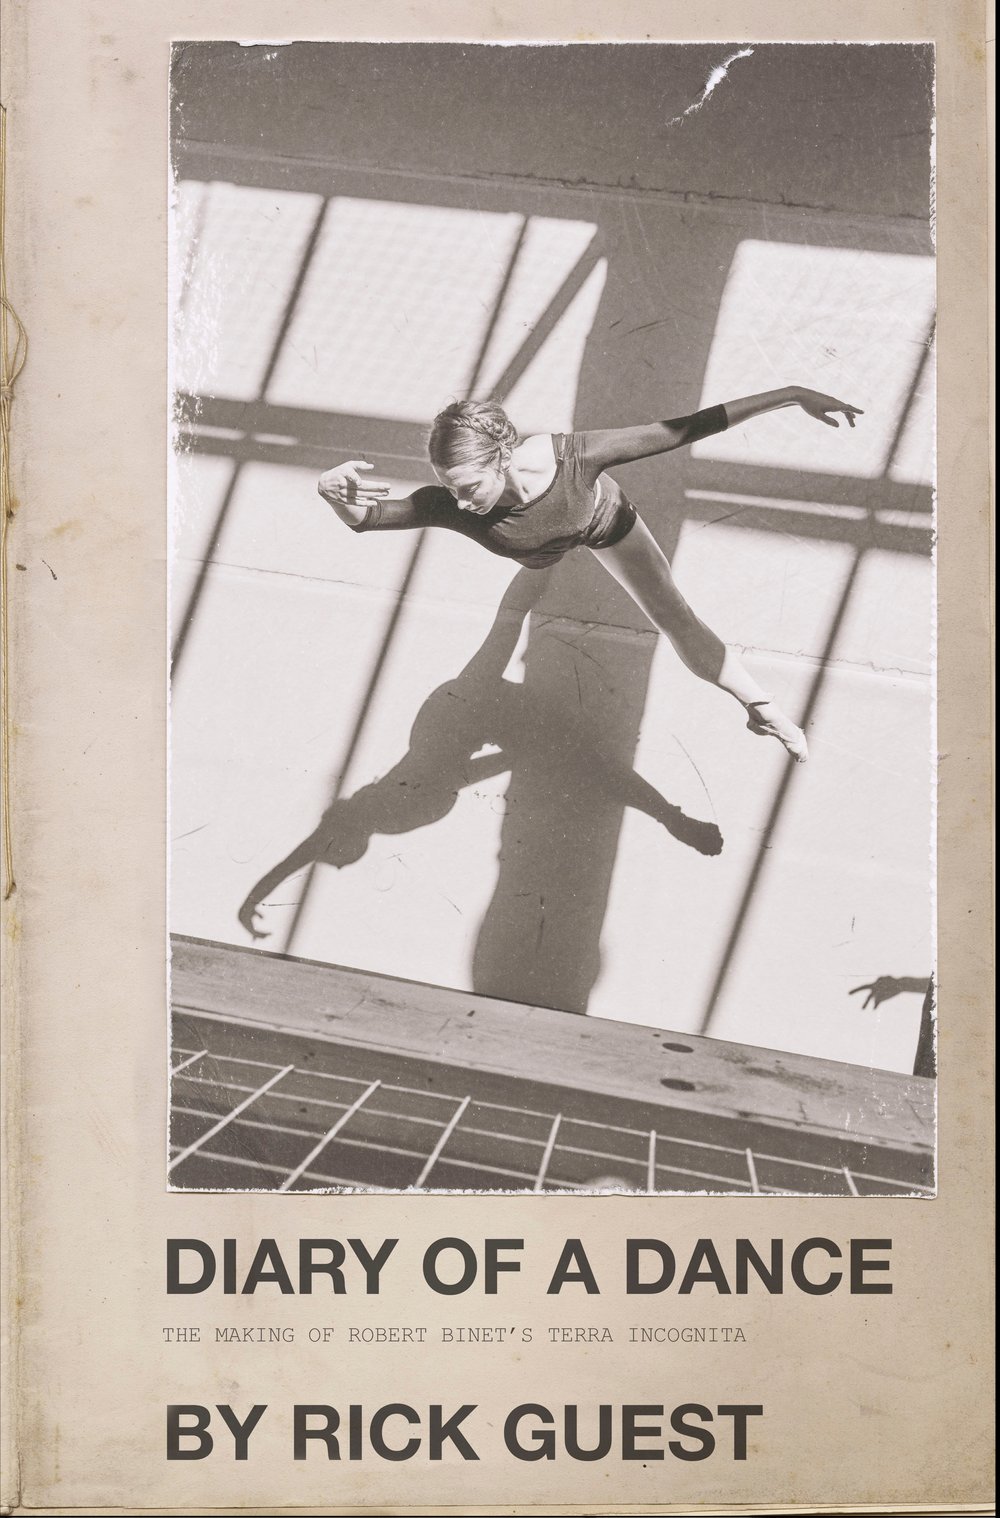 Image of Diary of a Dance - The Making of Robert Binet's Terra Incognita